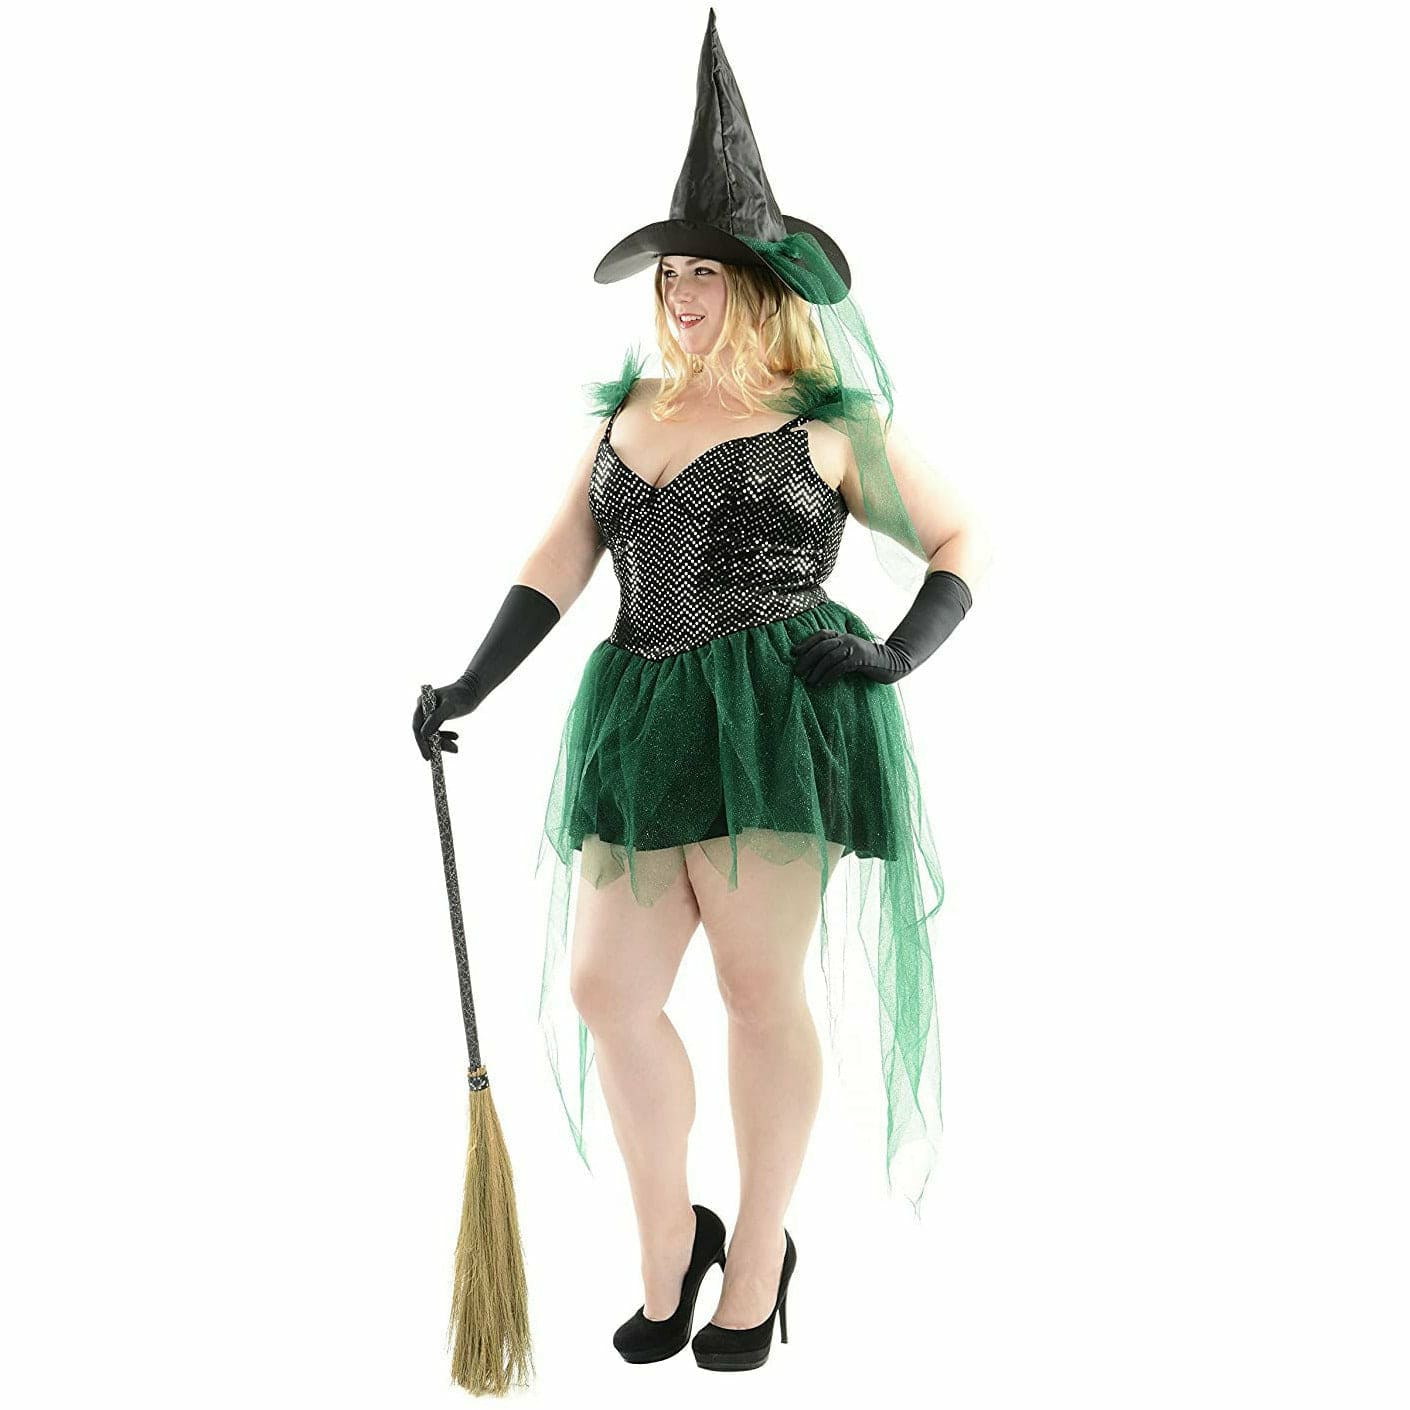 Ultimate Party Super Stores COSTUMES 1X Plus Size Emerald Witch Costume - S6